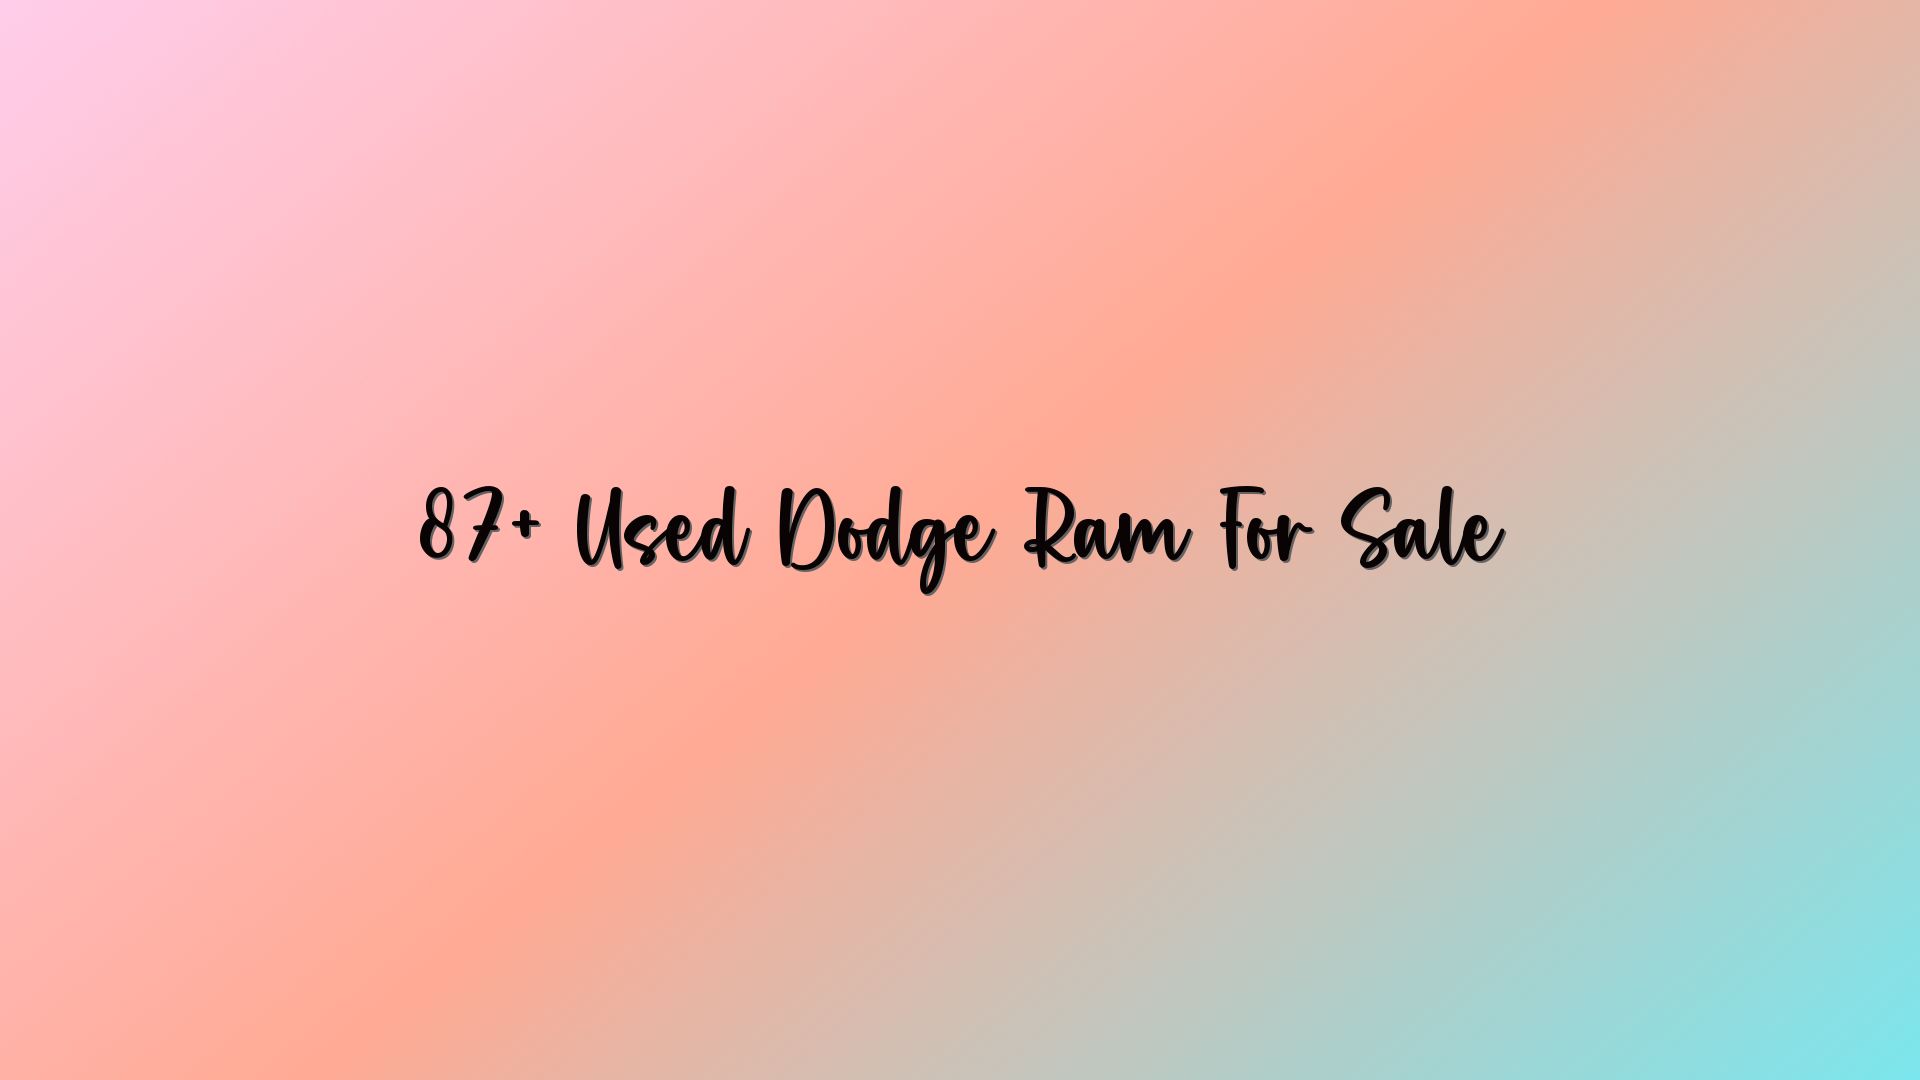 87+ Used Dodge Ram For Sale